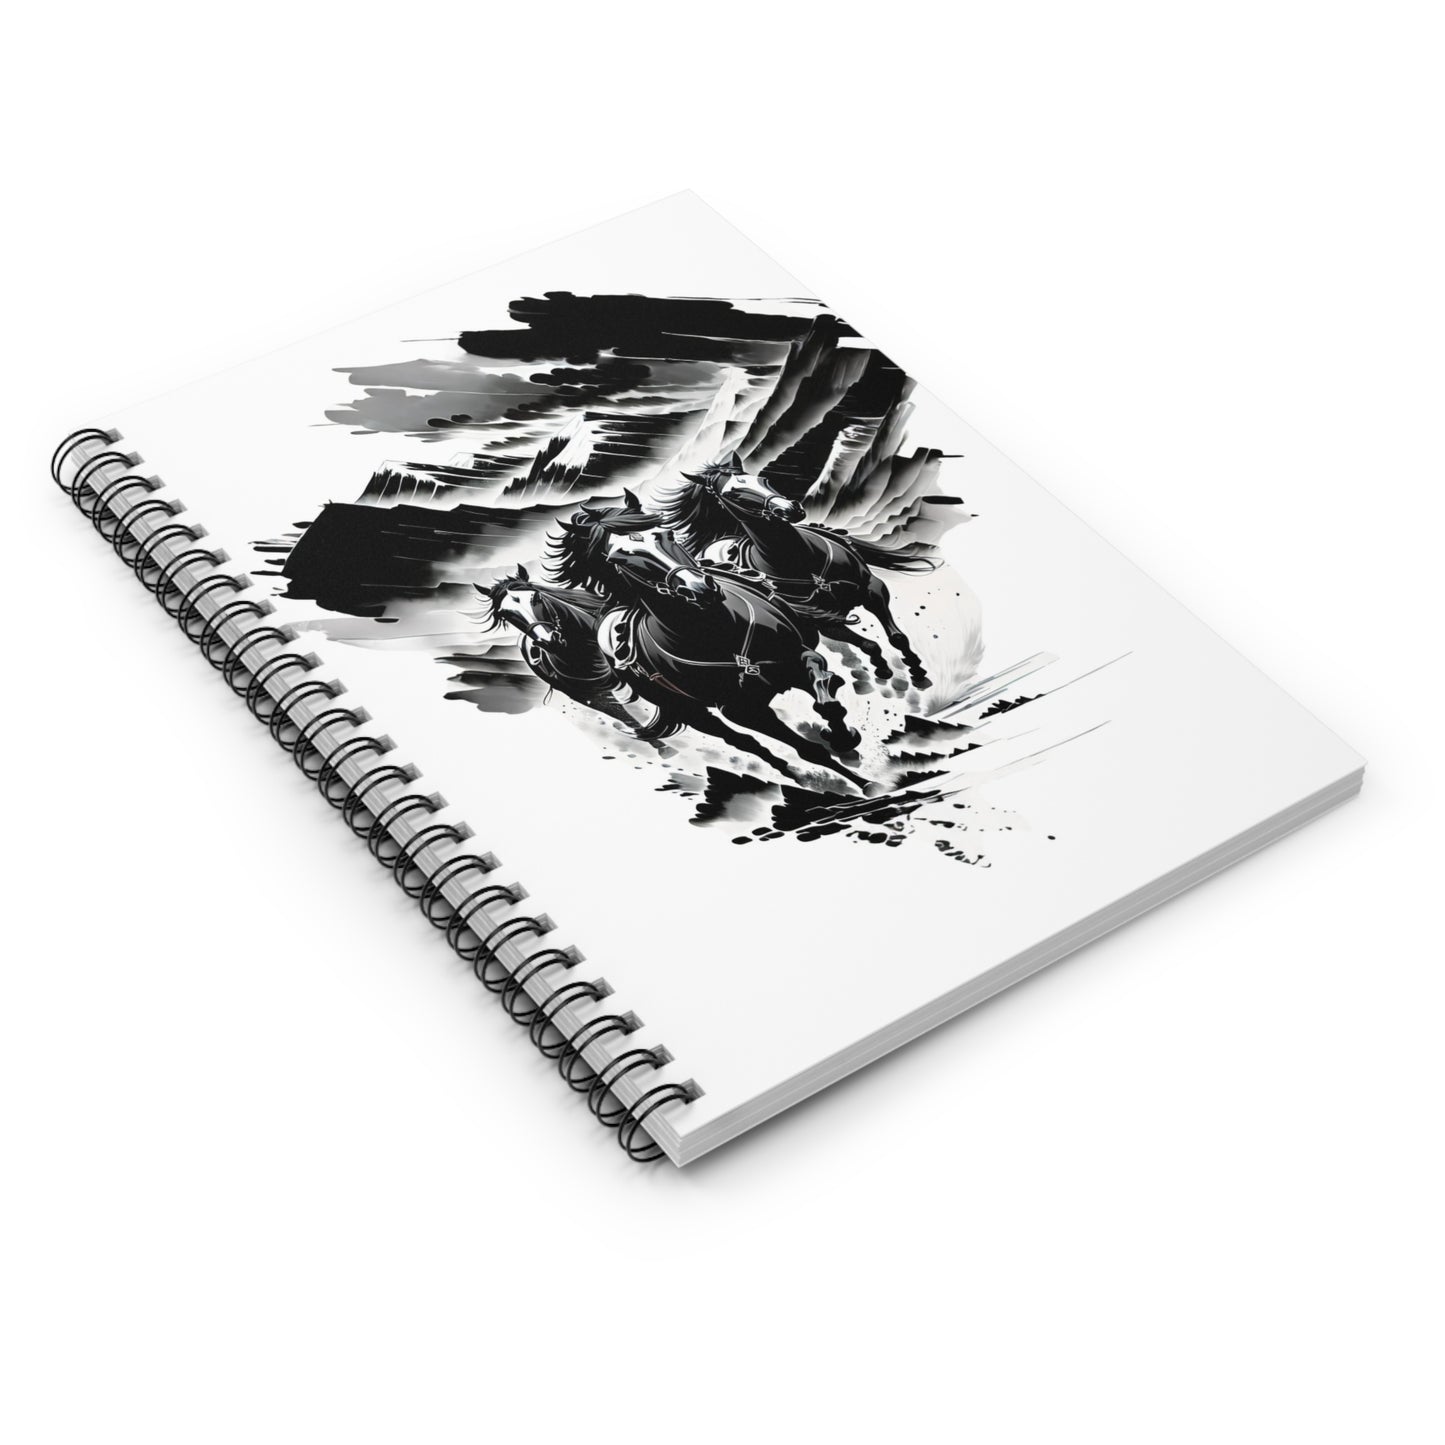 3 Horses Galloping In Mountains Spiral Notebook - Ruled Line